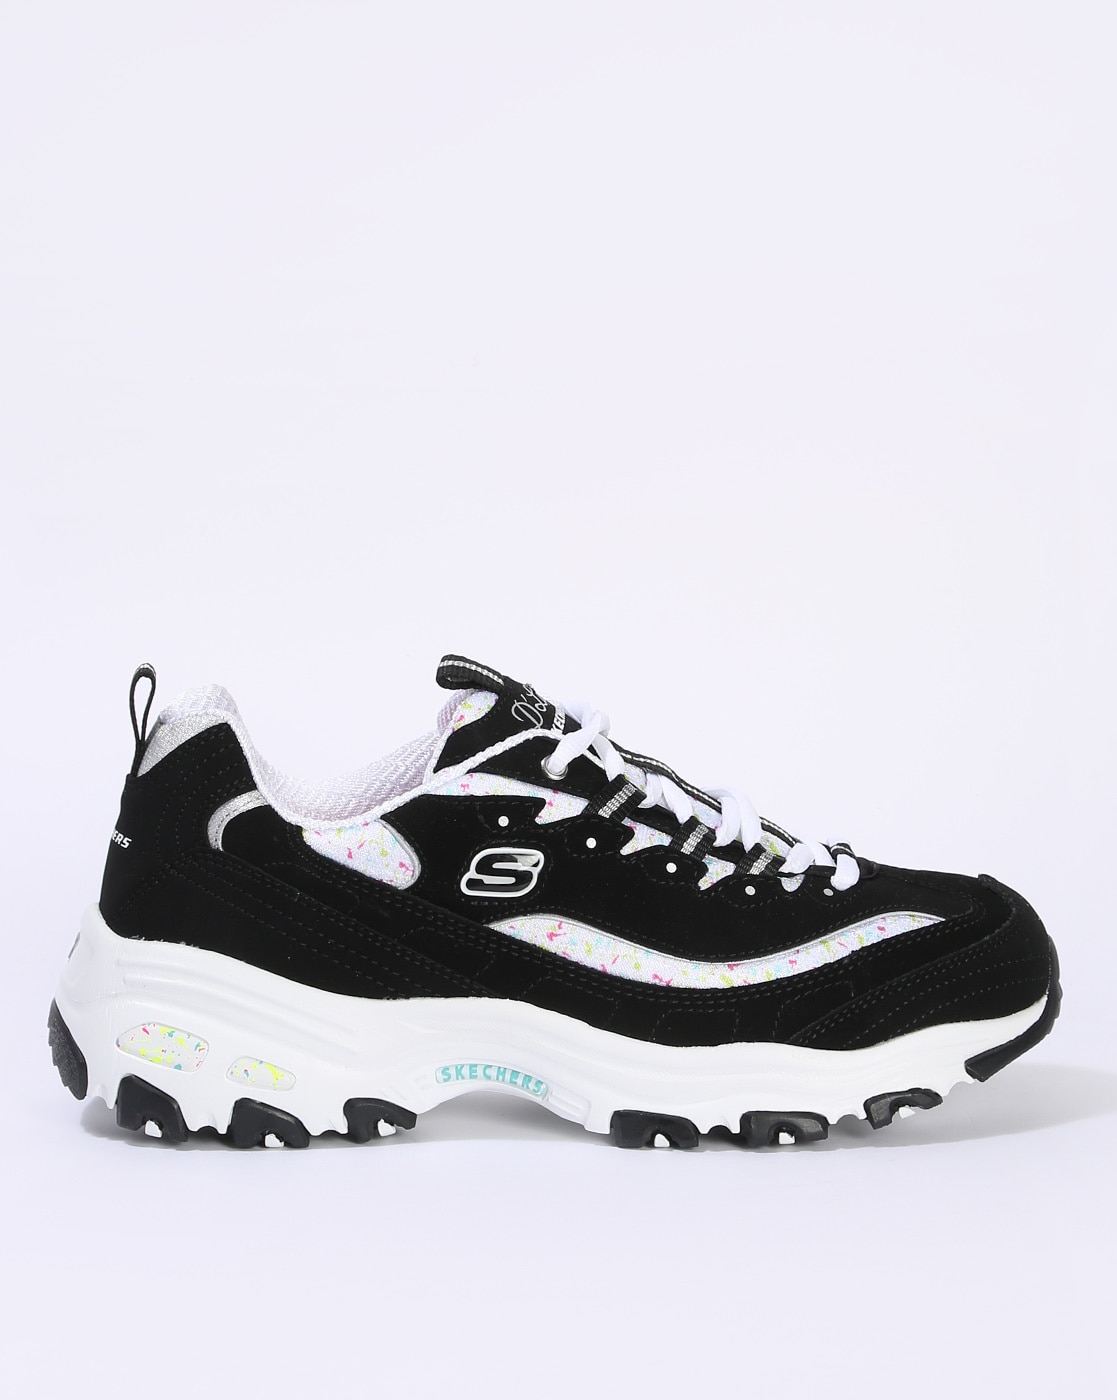 Sketchers Sneakers 9 Black White – Your Other Closet LLC